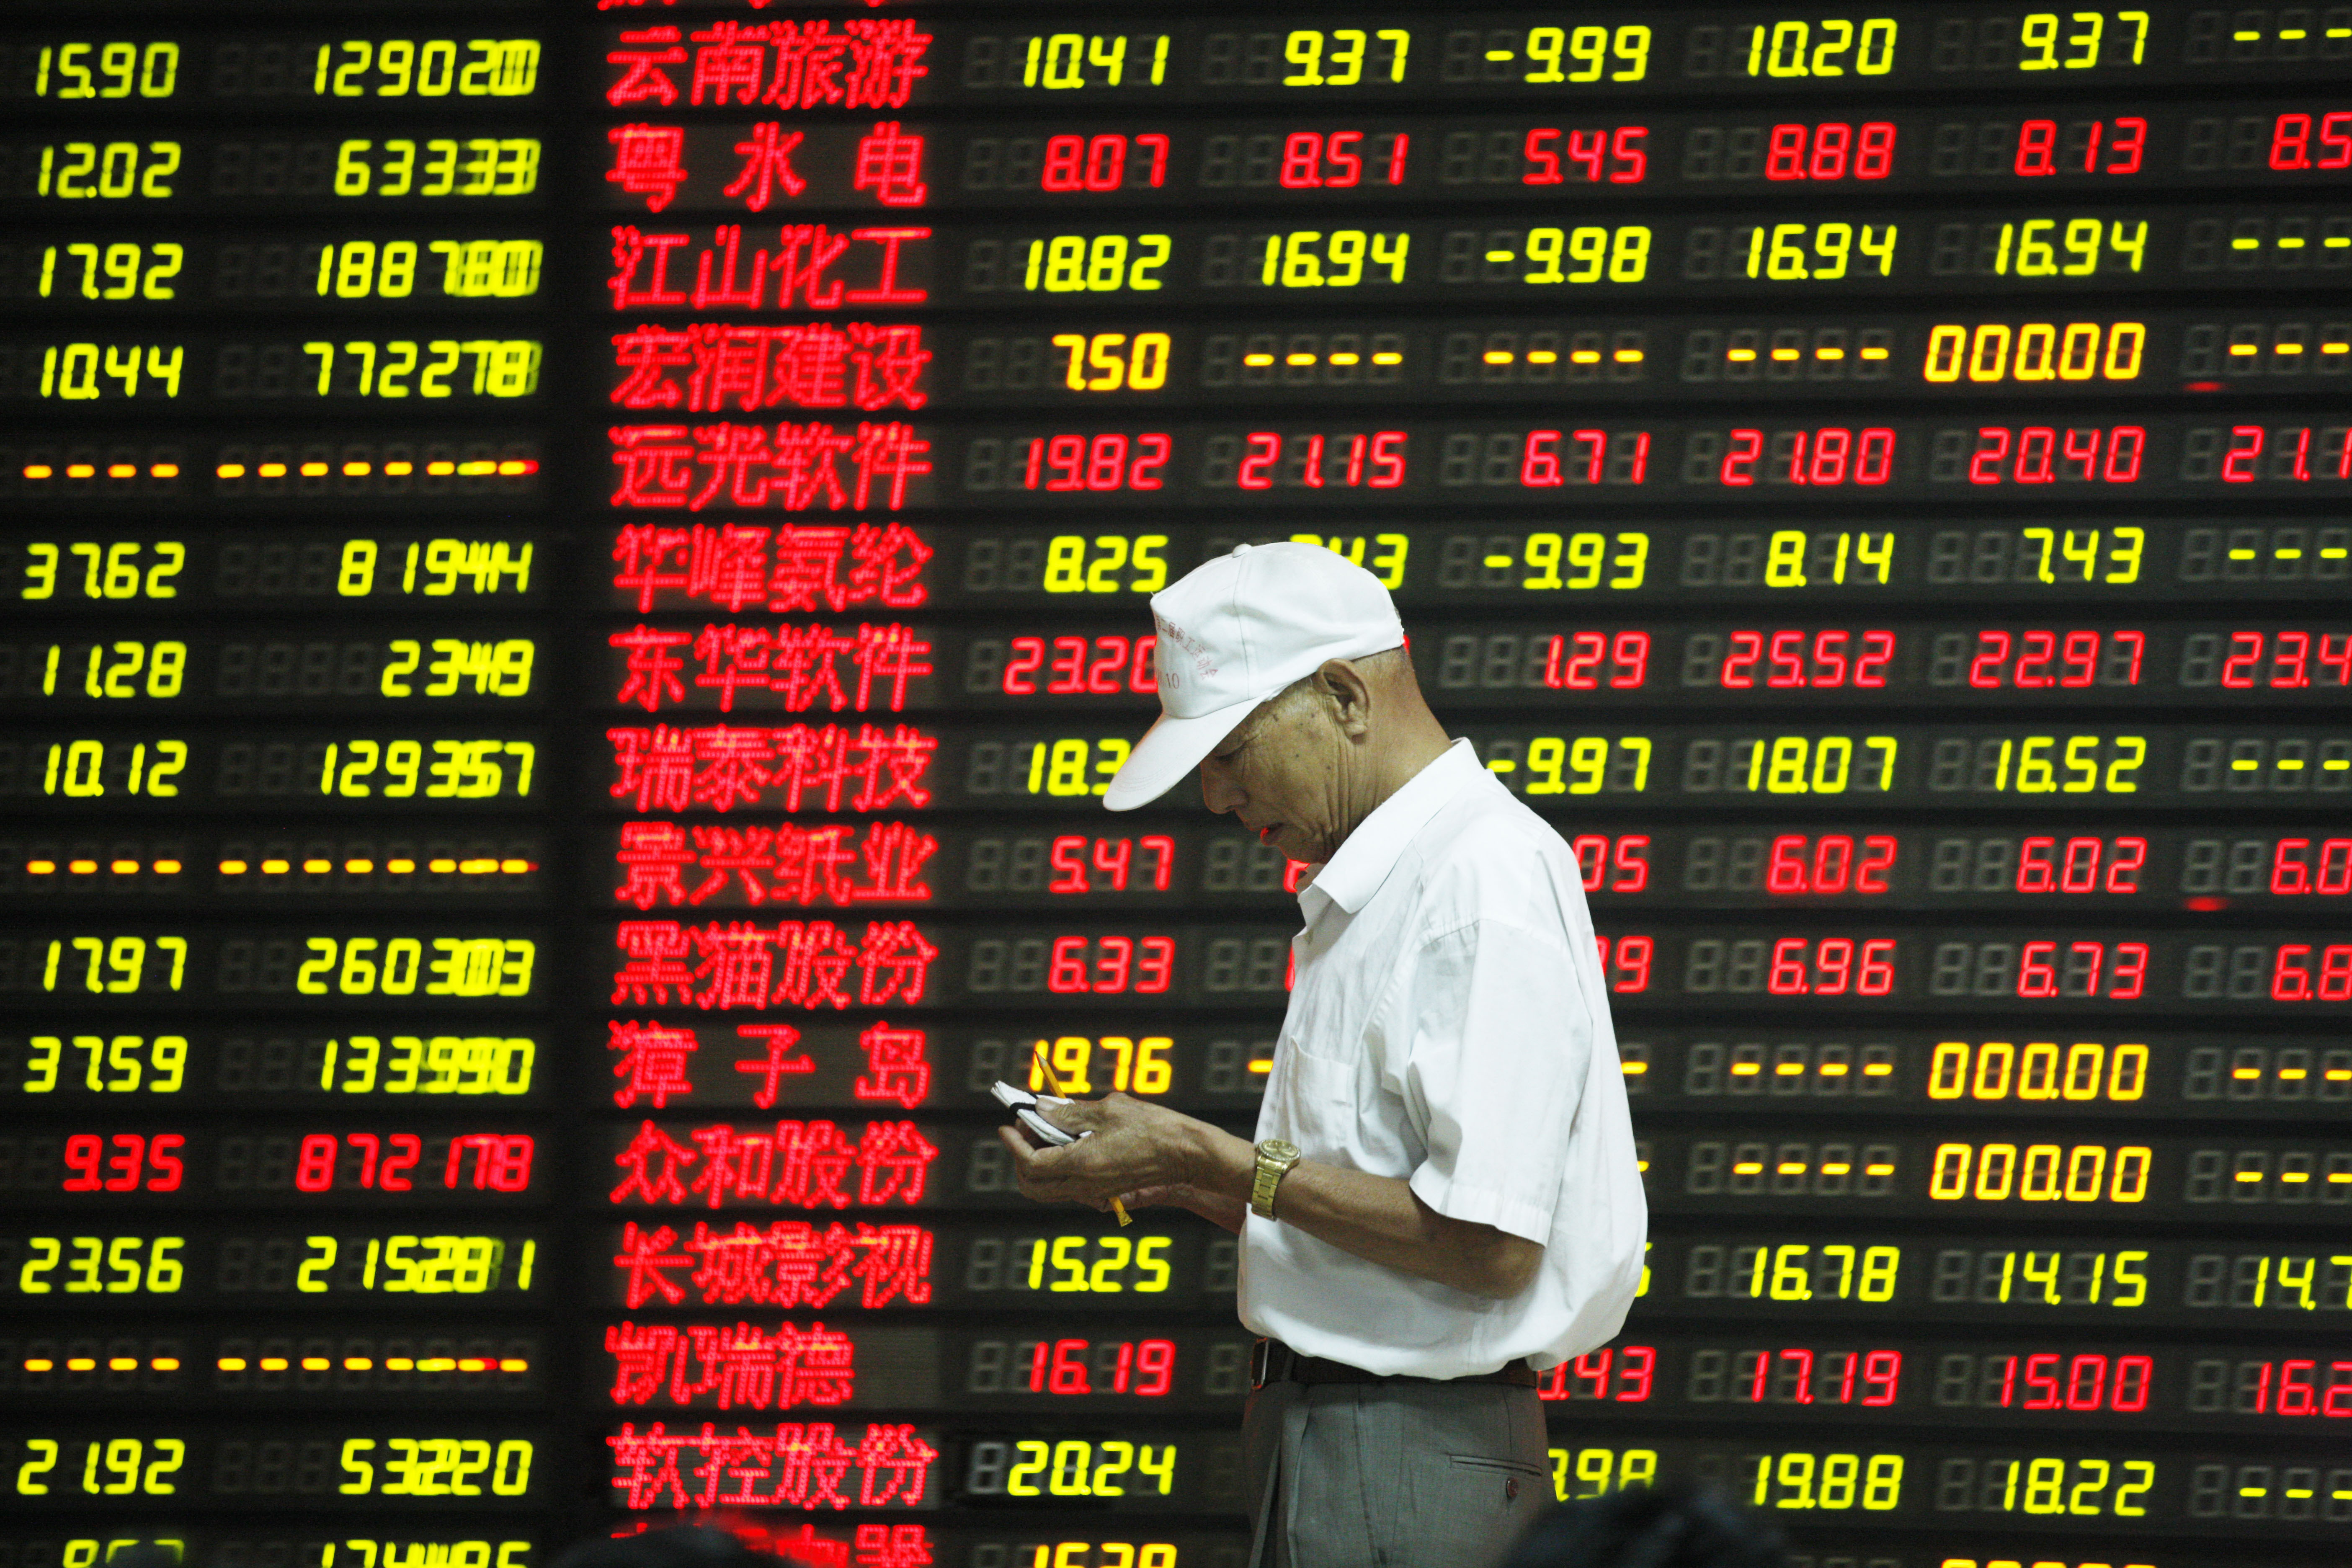 An investor in China is framed by an electronic board showing stock prices in the country's volatile equity markets. Photo: Xinhua